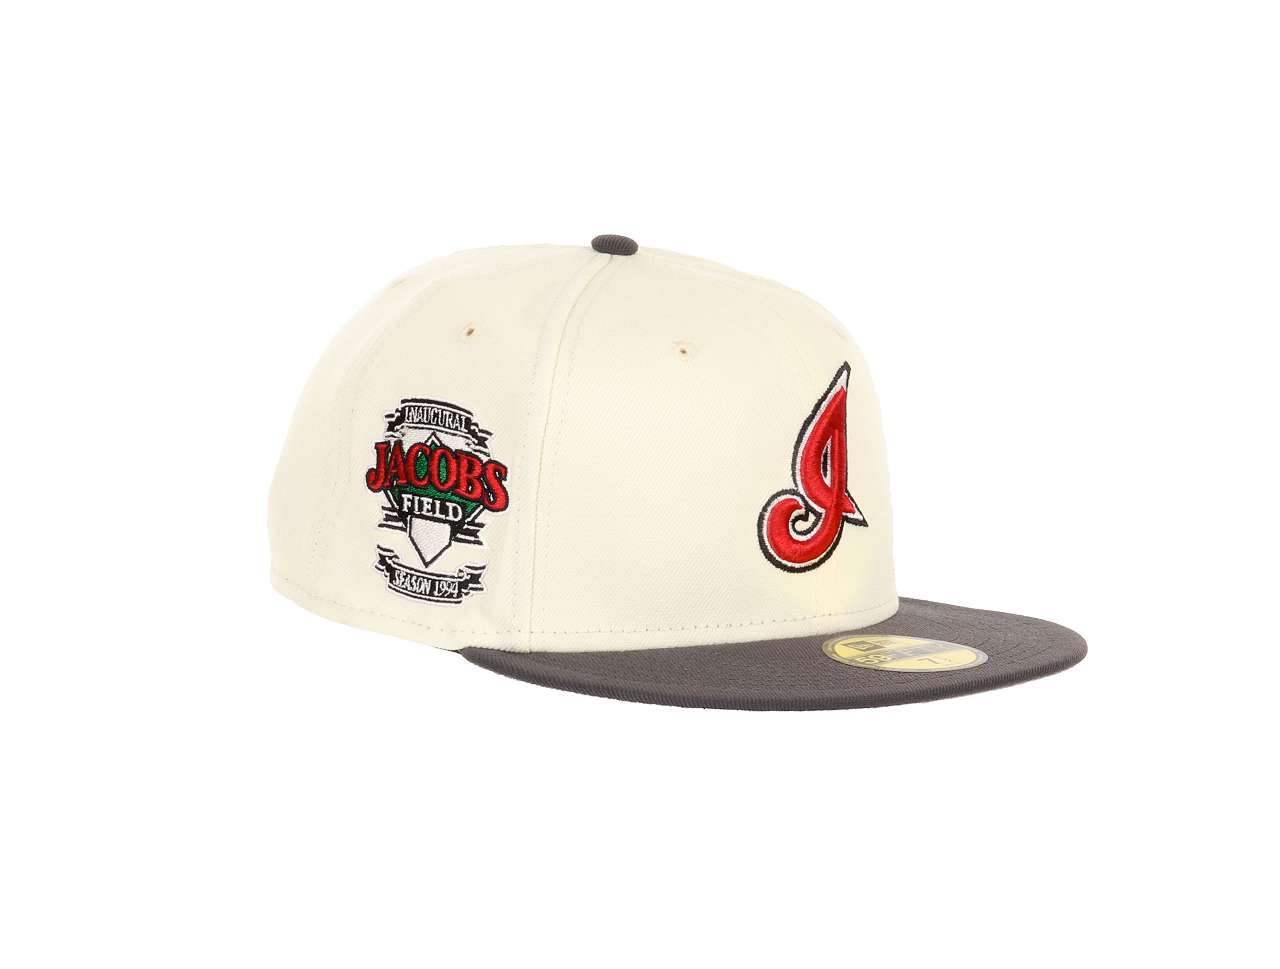 Cleveland Indians MLB Jacobs Field 10th Anniversary Sidepatch Chrome 59Fifty Basecap New Era